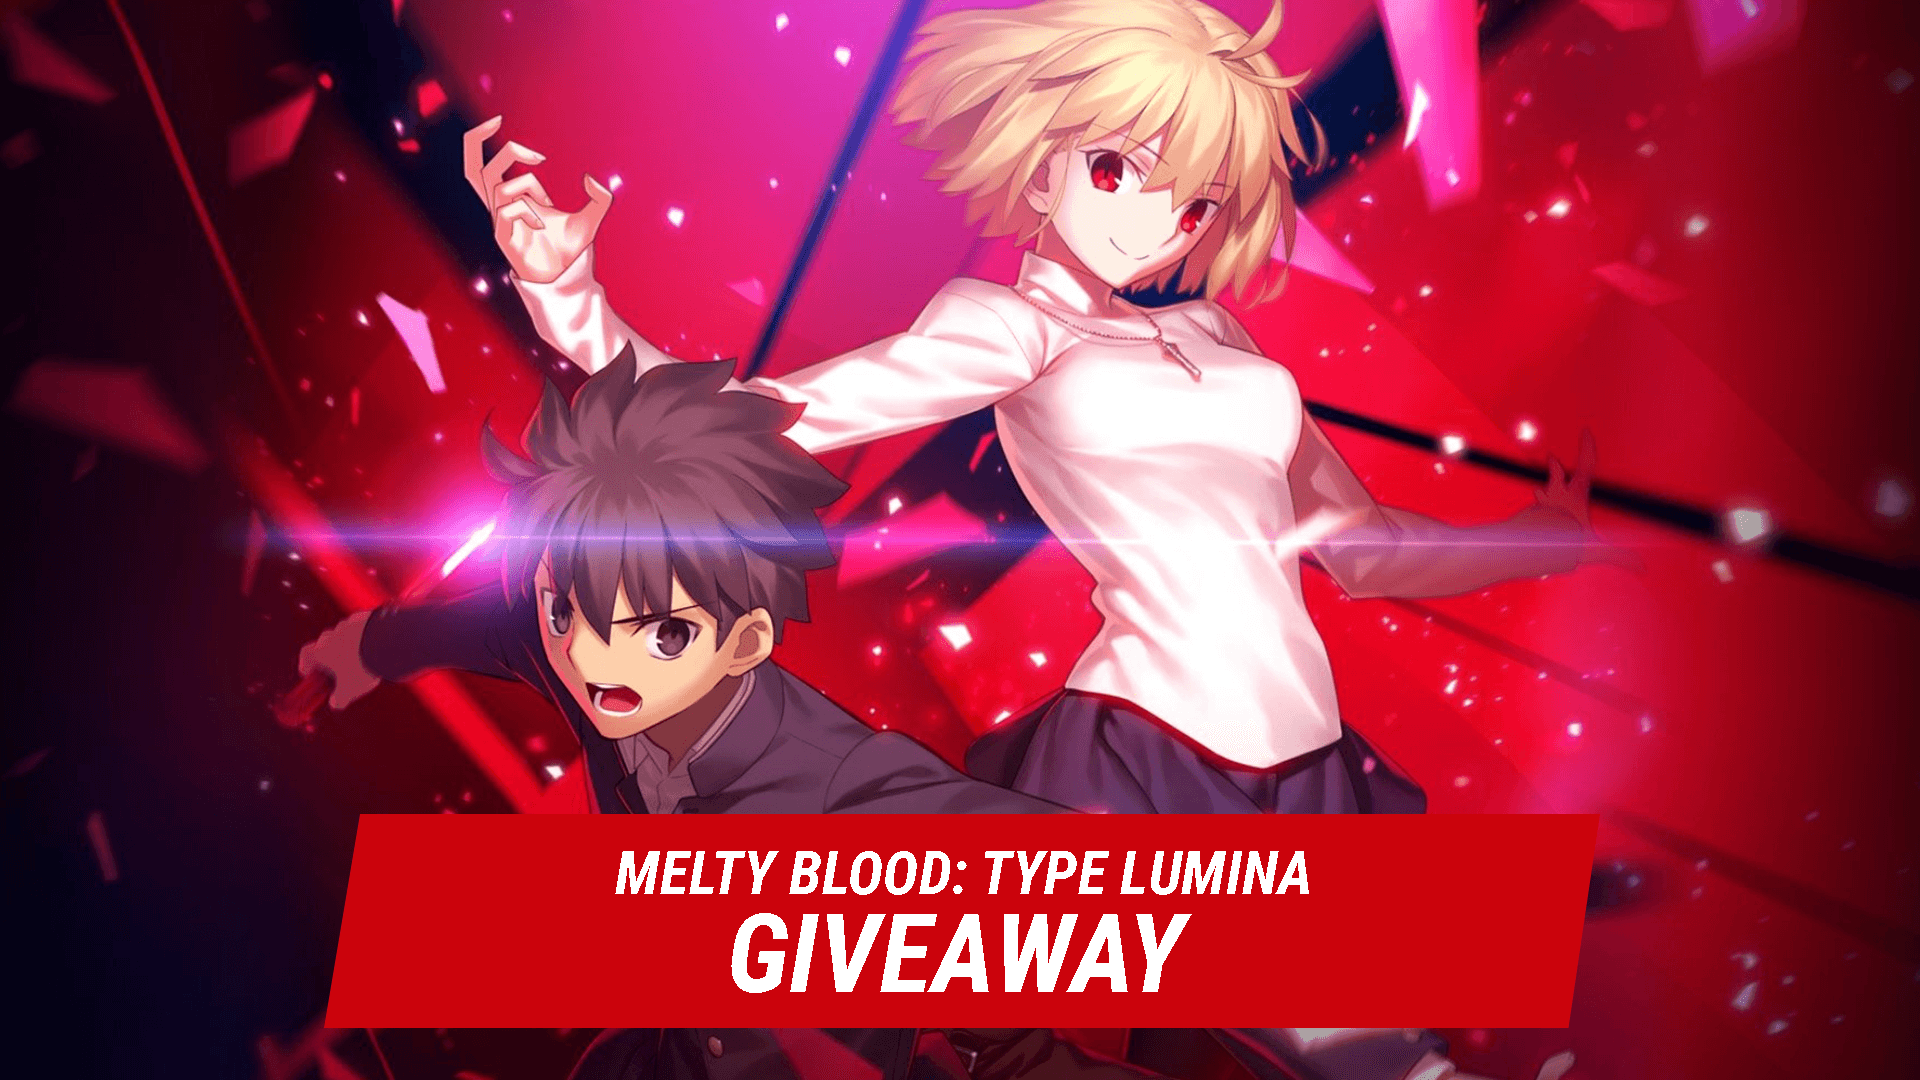 Win a copy of MELTY BLOOD: TYPE LUMINA!